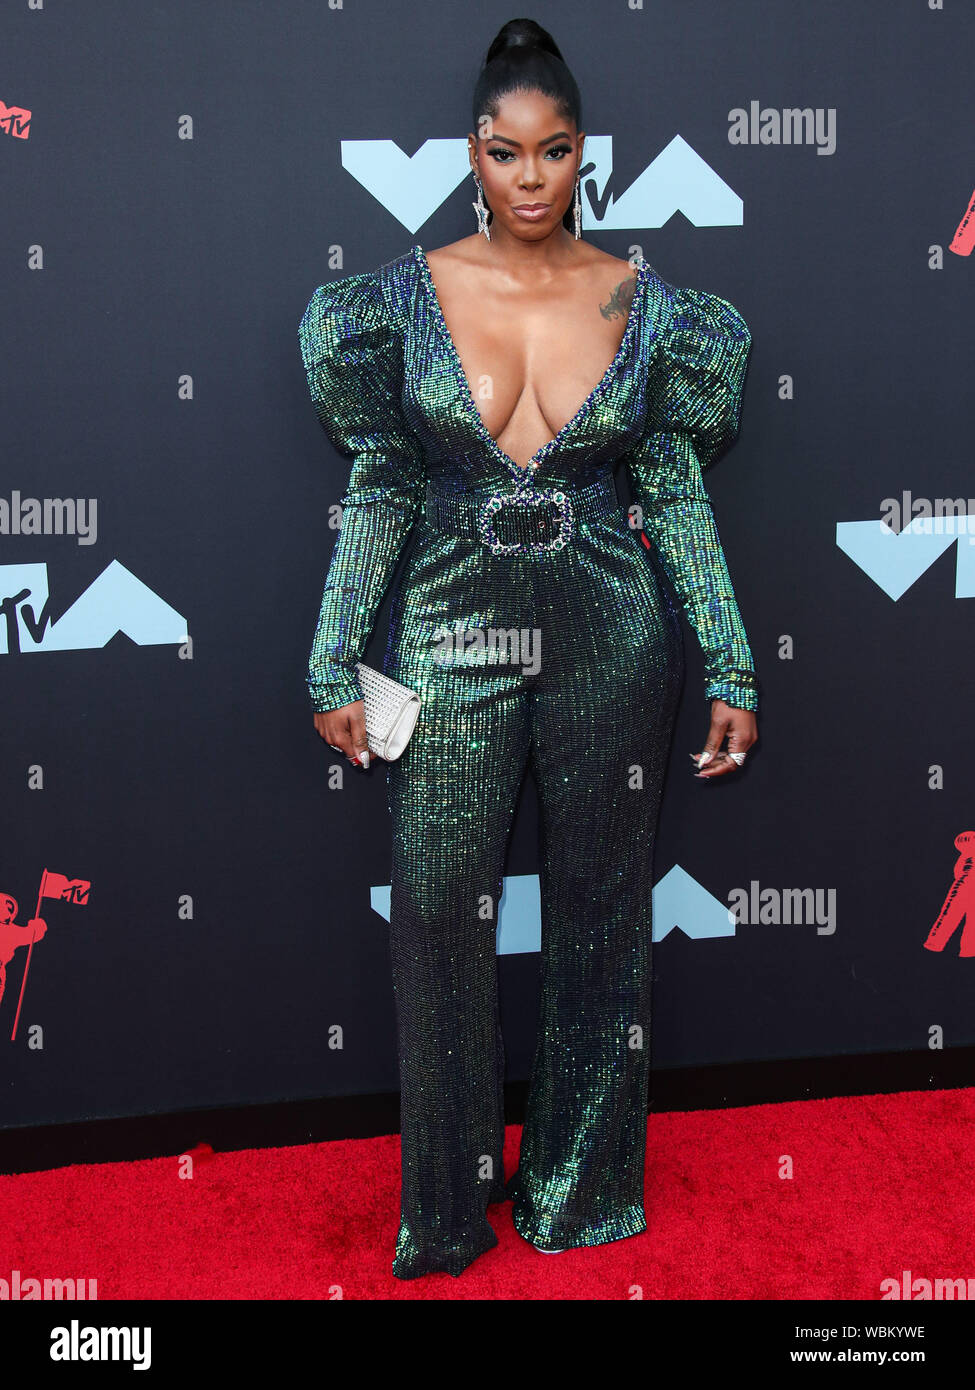 Newark, United States. 26th Aug, 2019. NEWARK, NEW JERSEY, USA - AUGUST 26: Juju Casteneda arrives at the 2019 MTV Video Music Awards held at the Prudential Center on August 26, 2019 in Newark, New Jersey, United States. (Photo by Xavier Collin/Image Press Agency) Credit: Image Press Agency/Alamy Live News Credit: Image Press Agency/Alamy Live News Stock Photo